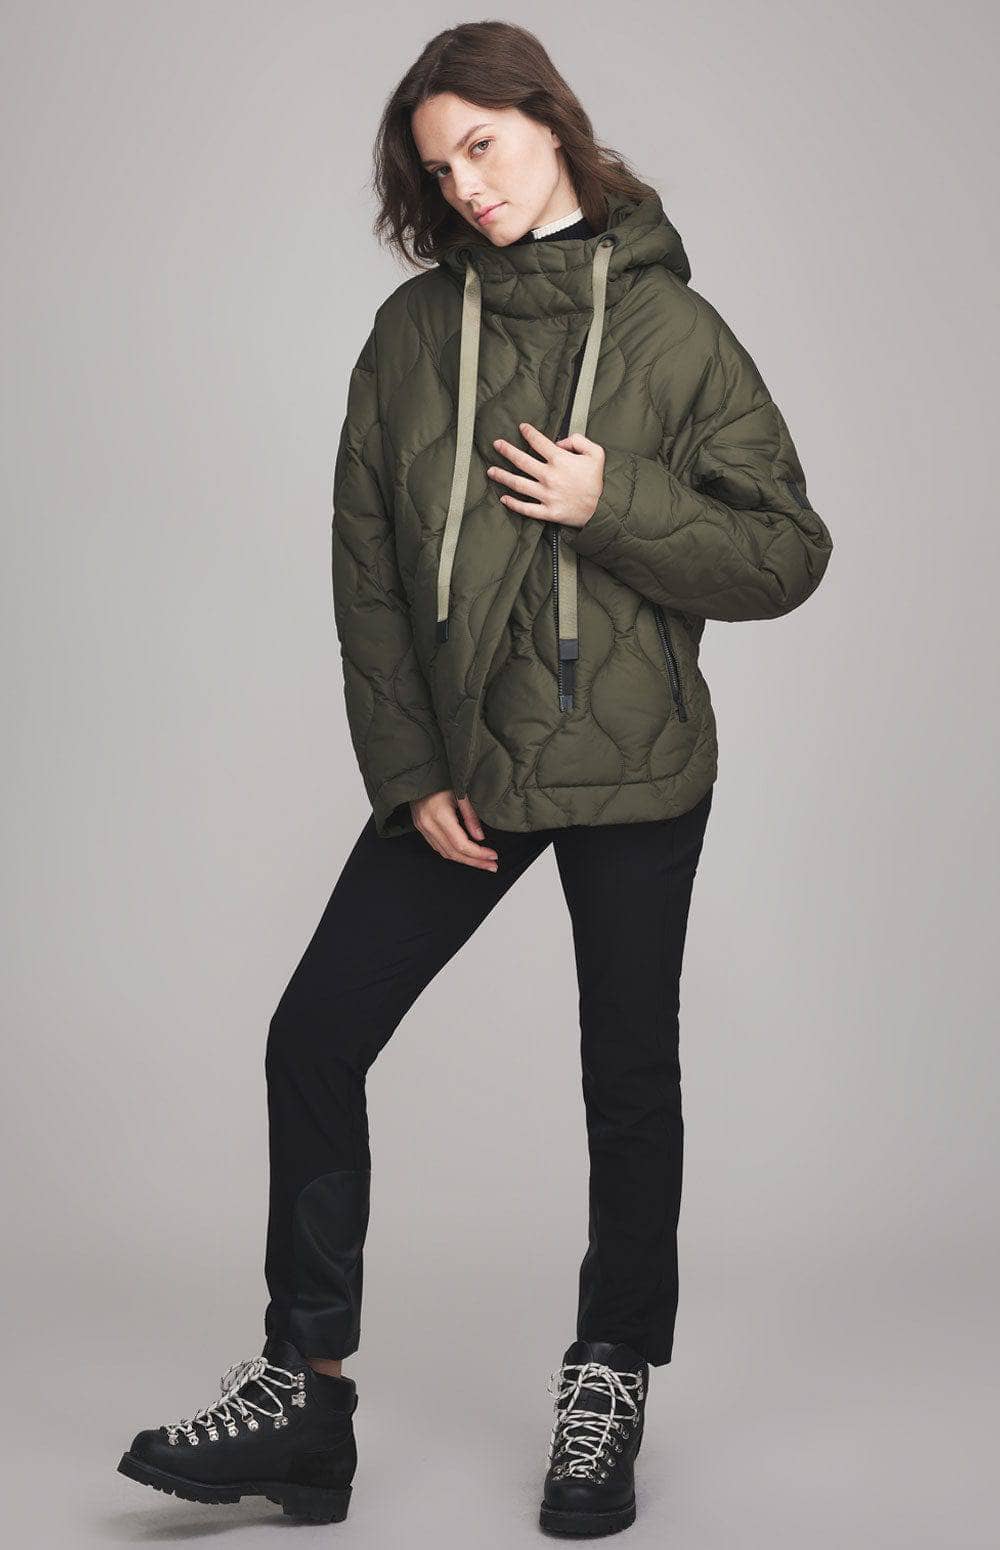 ANR Womens Jacket Nori Quilted Jacket | Olive